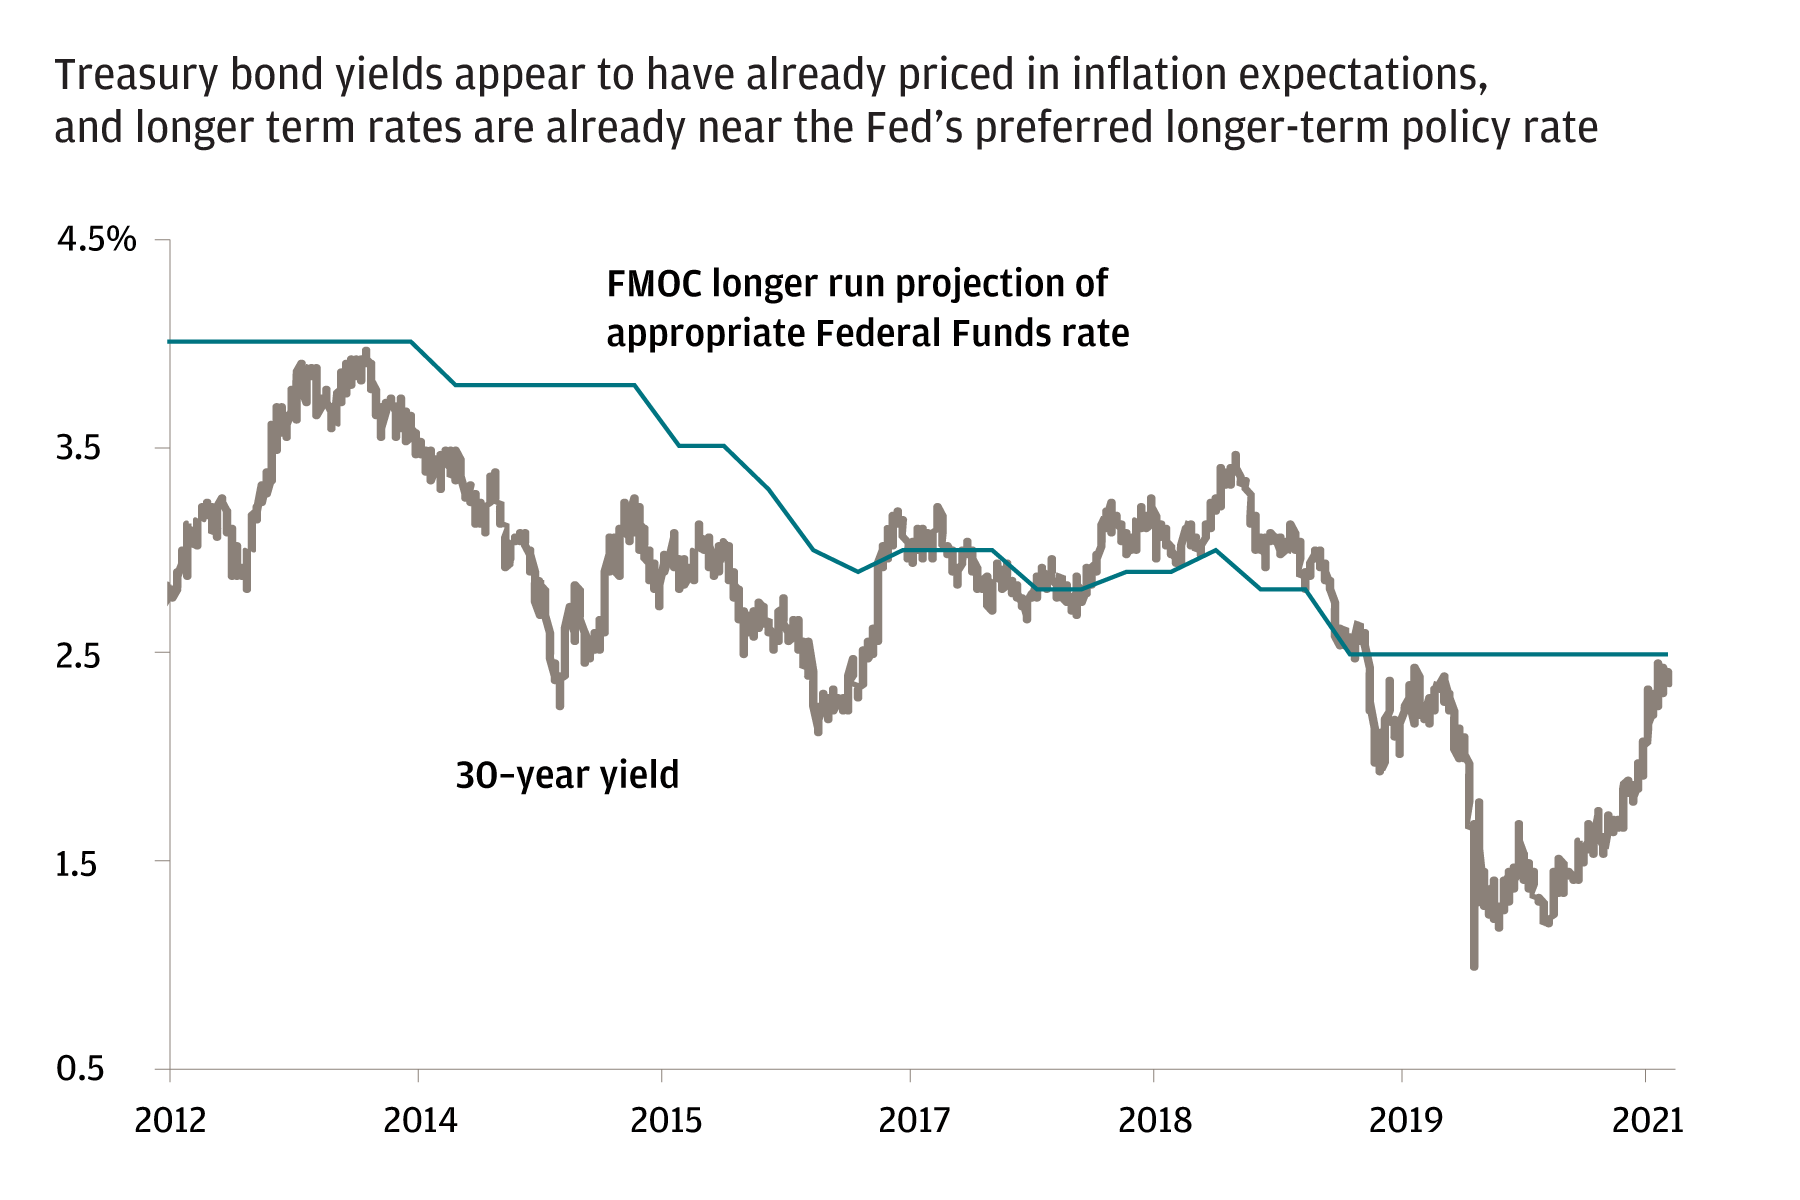 Comparing the 30-year yield with the Federal Funds rate, treasury bond yields appear to have already priced in inflation expectations